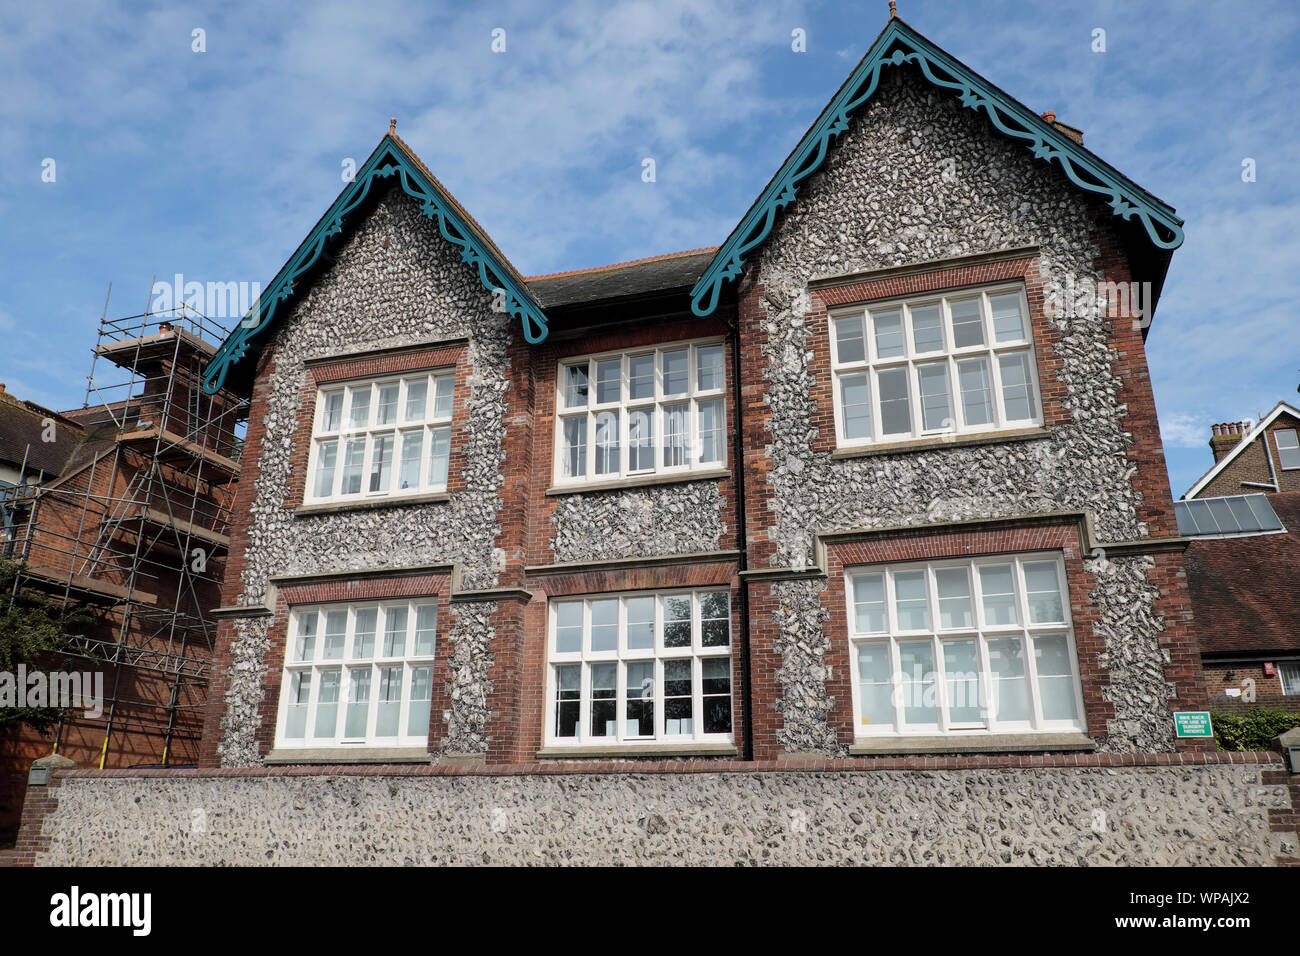 Exterior view of flint wall construction brick and stone house front facade in Lewes East Sussex England UK  KATHY DEWITT Stock Photo